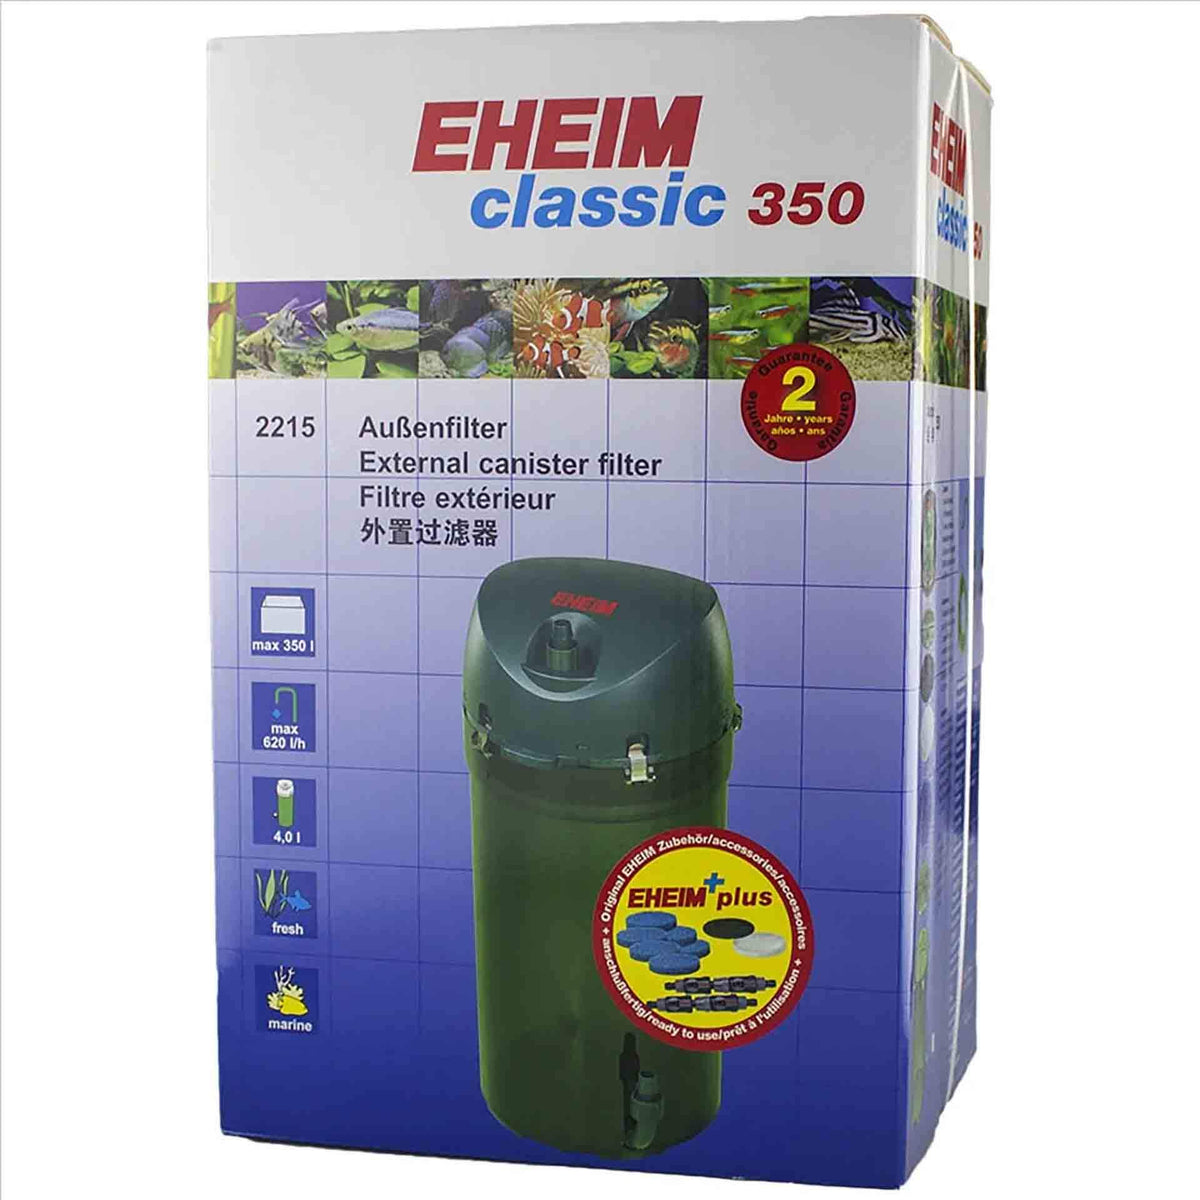 Eheim Classic 350 - 2215  (With Sponge Media) Canister Filter